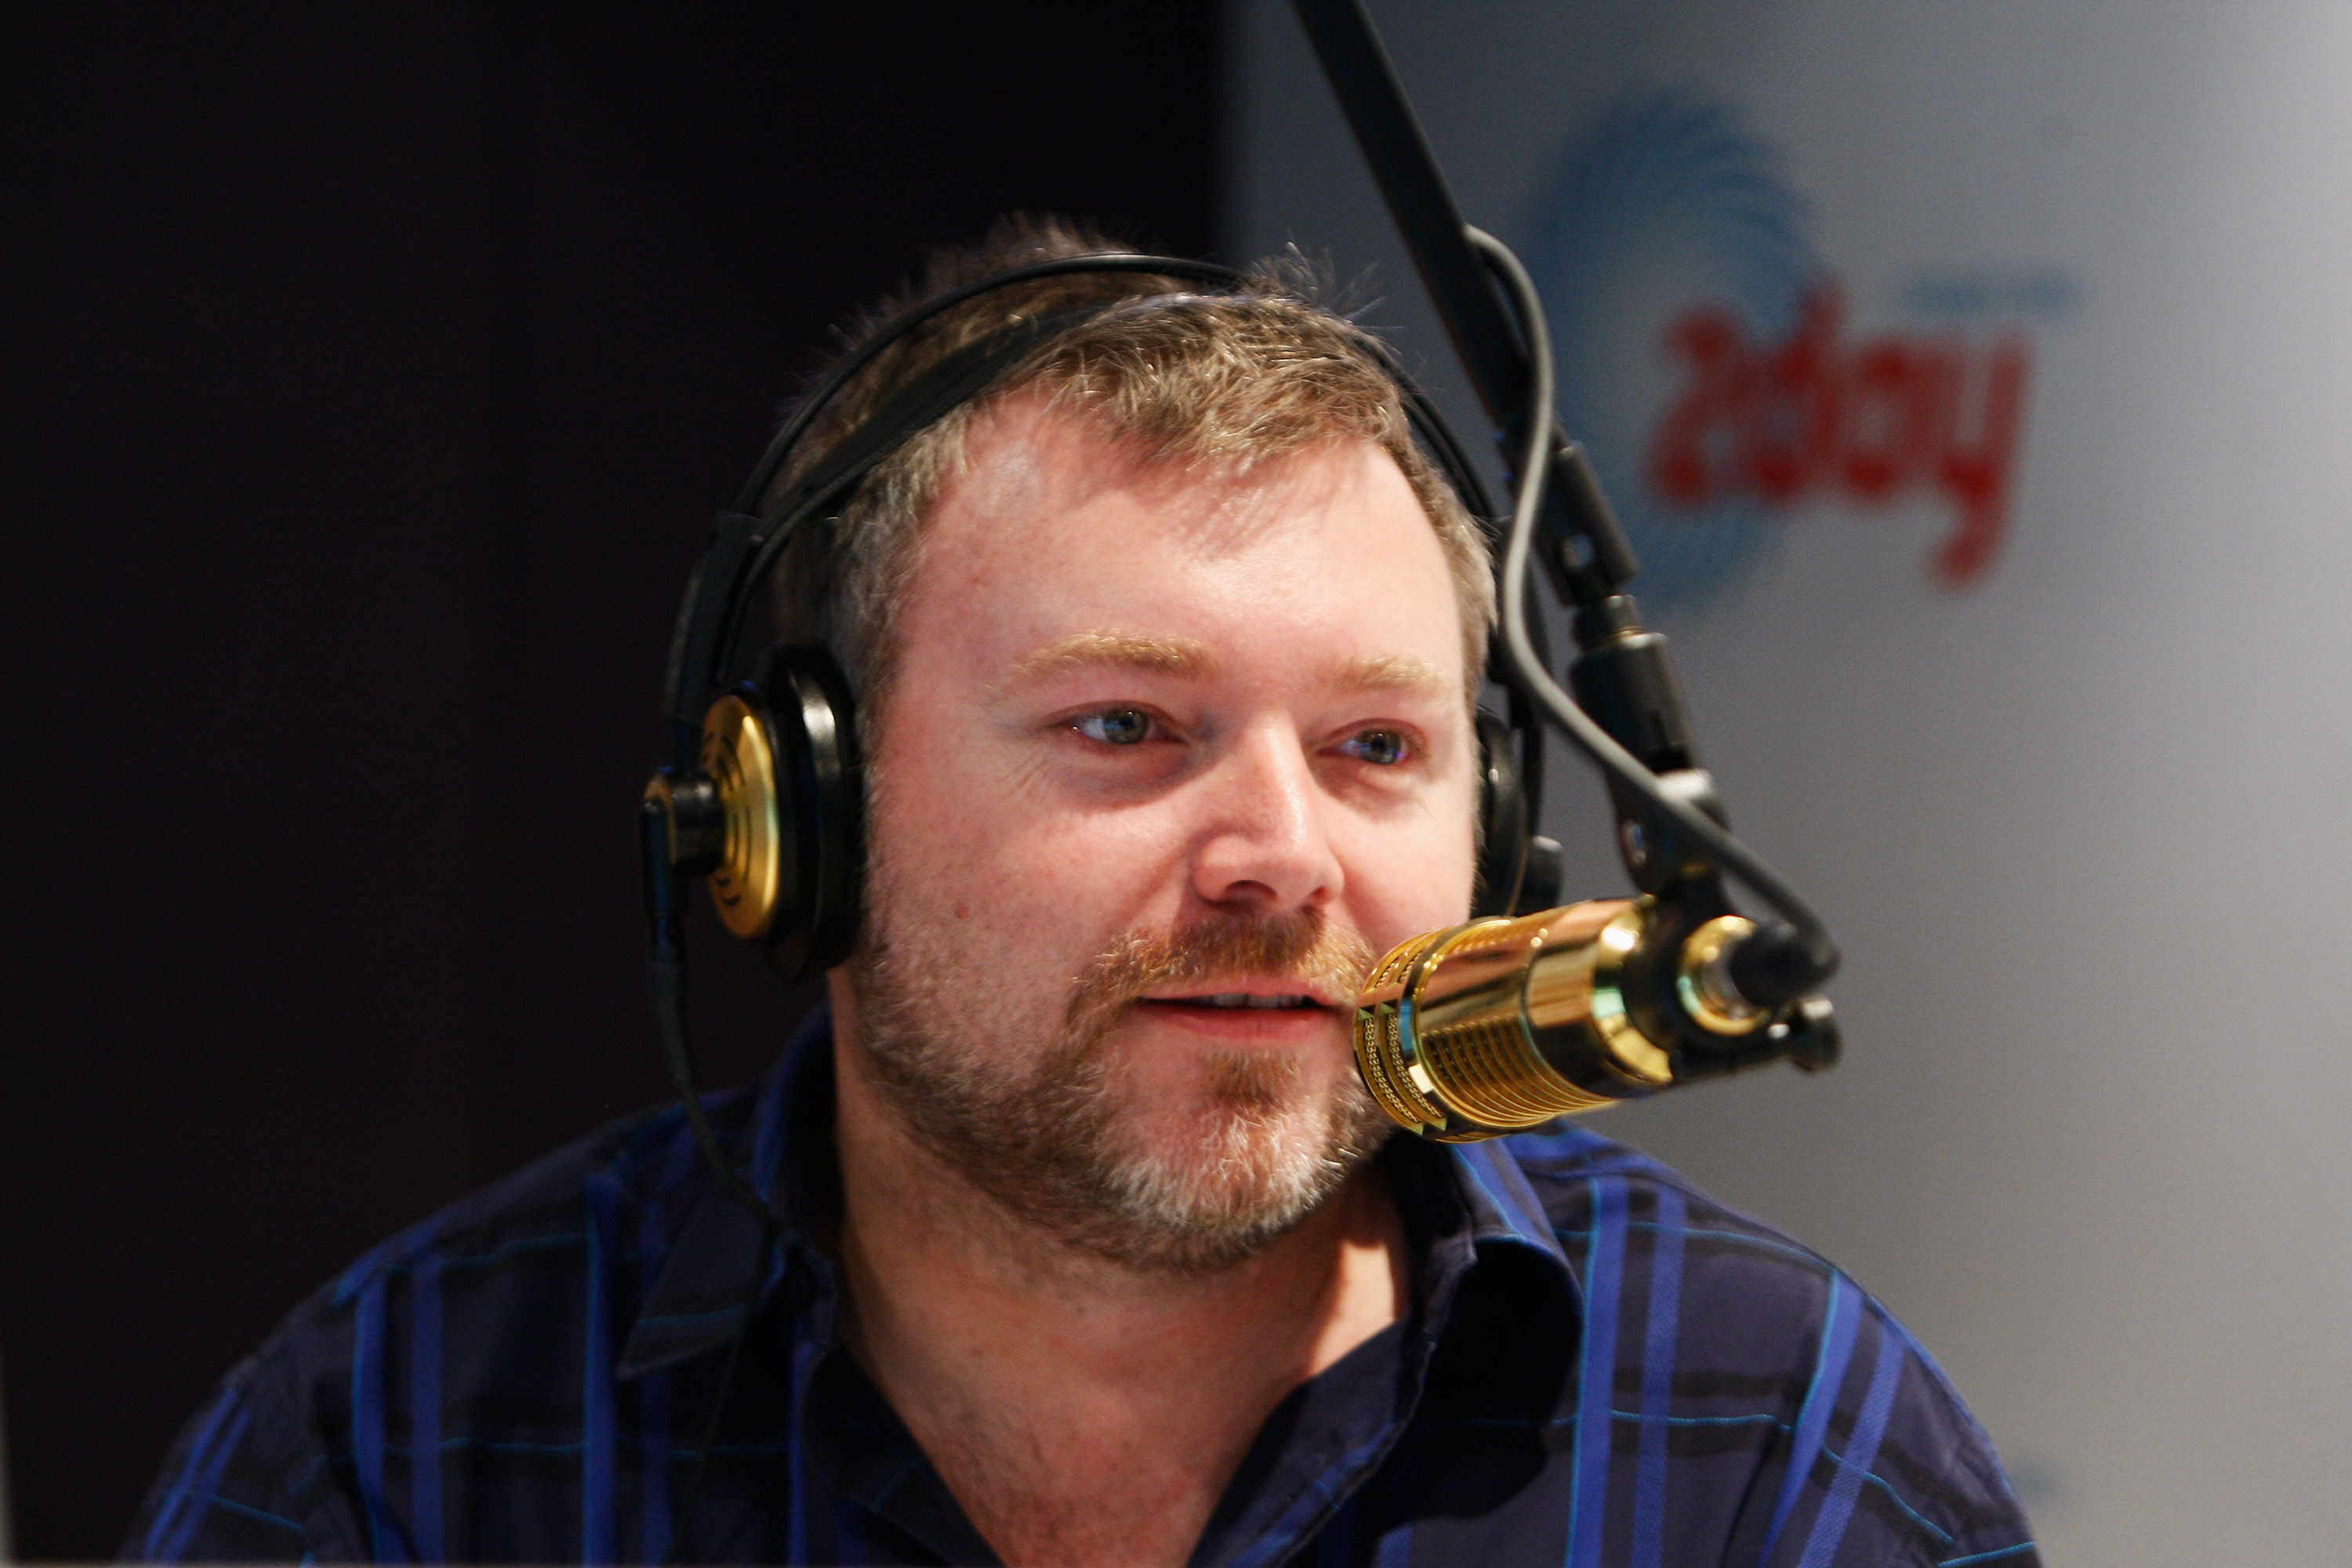 Kyle Sandilands on the 2Day FM Kyle and Jackie O Breakfast show at World Square on September 24, 2008 in Sydney, Australia.